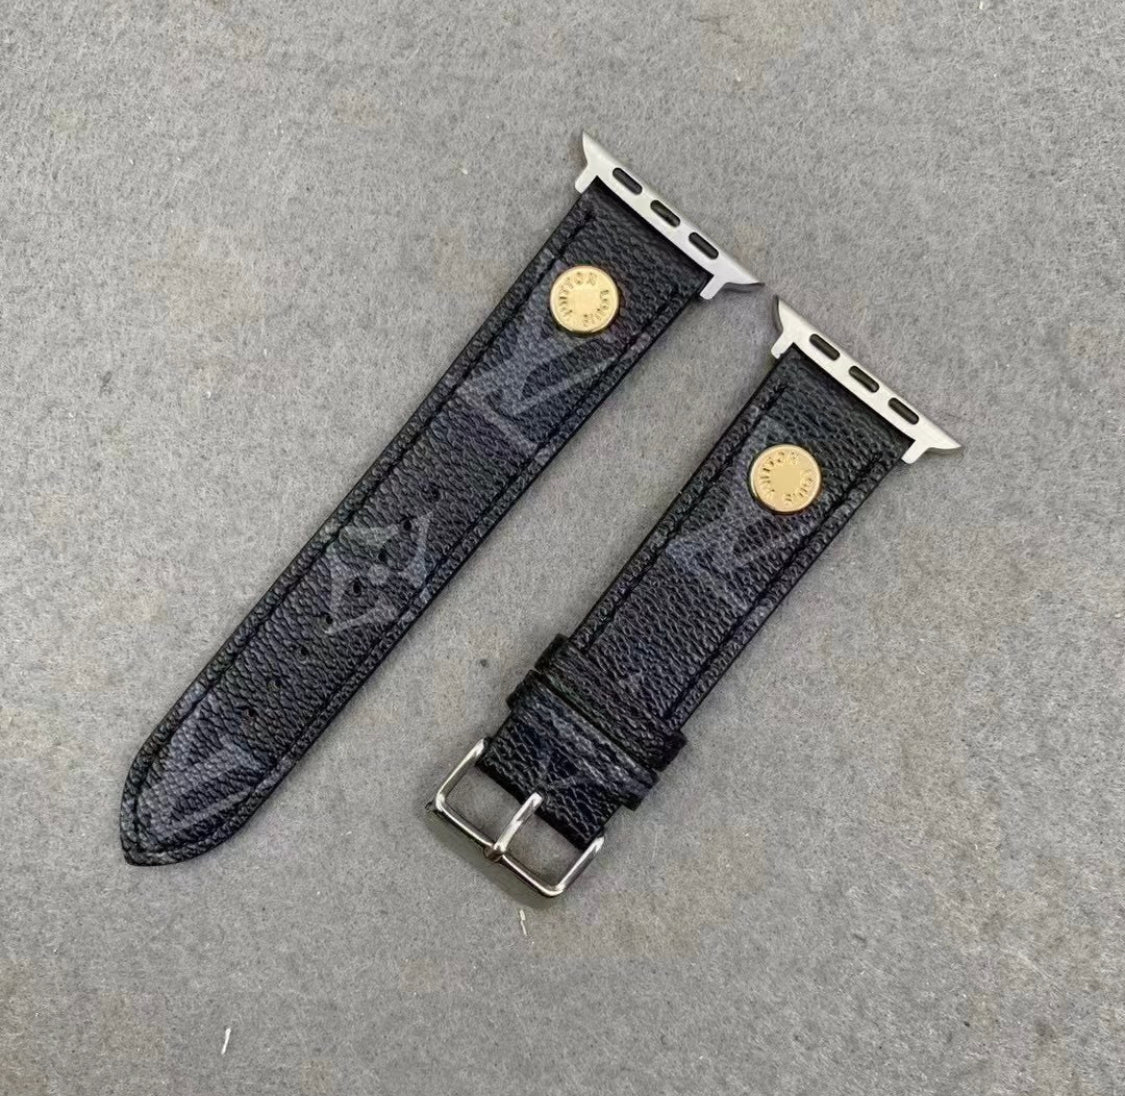 Lv New leather apple watch band